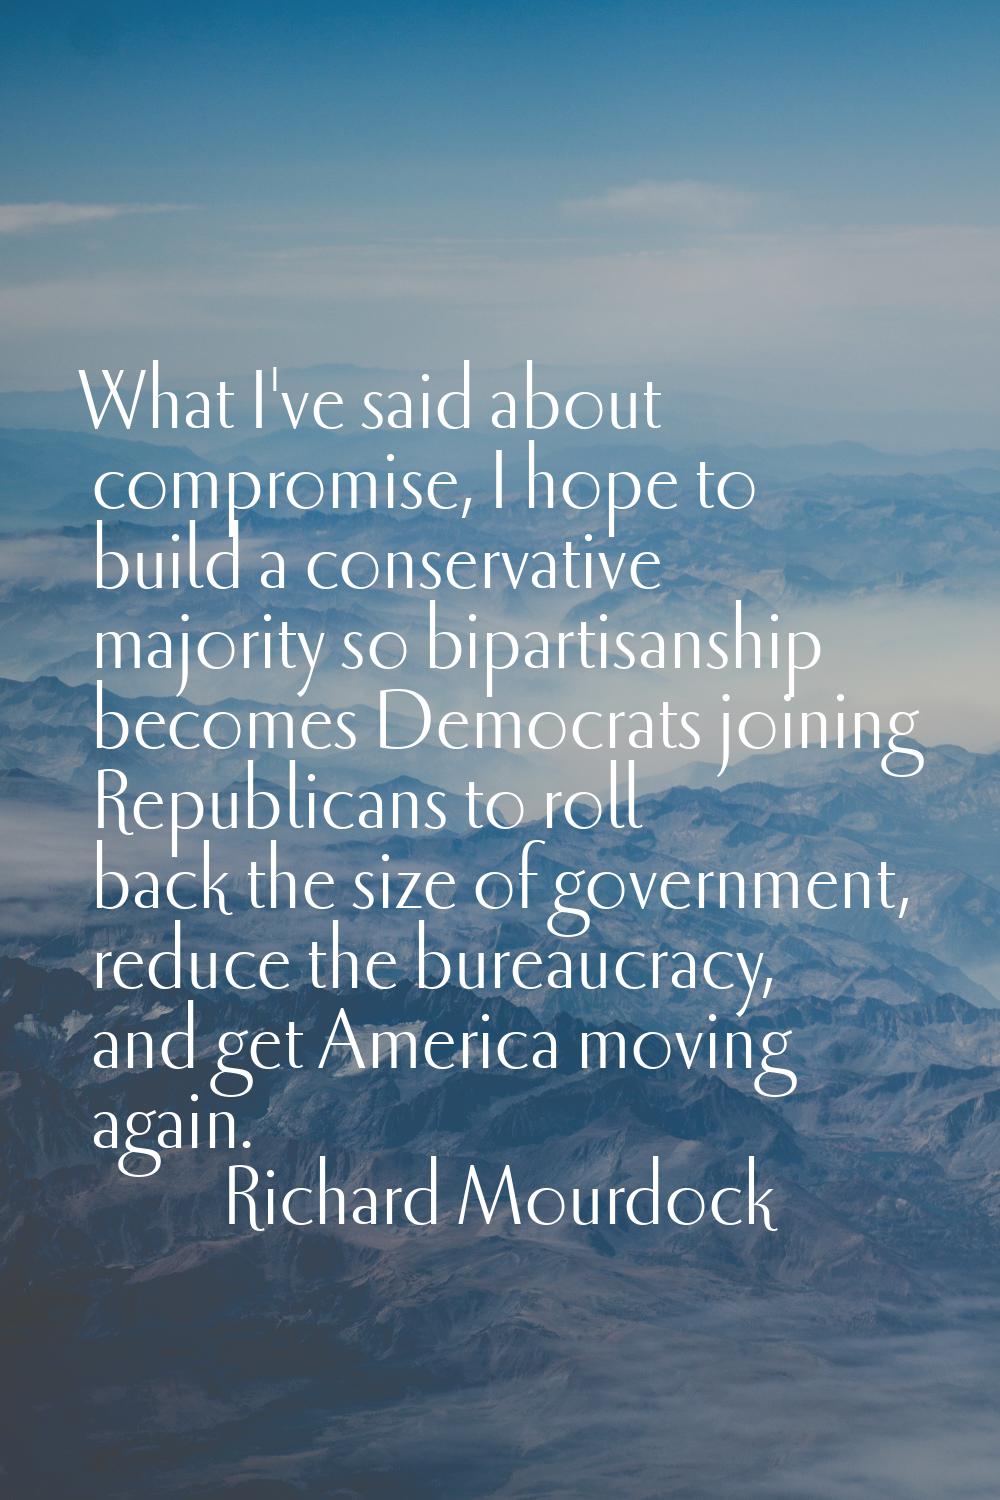 What I've said about compromise, I hope to build a conservative majority so bipartisanship becomes 